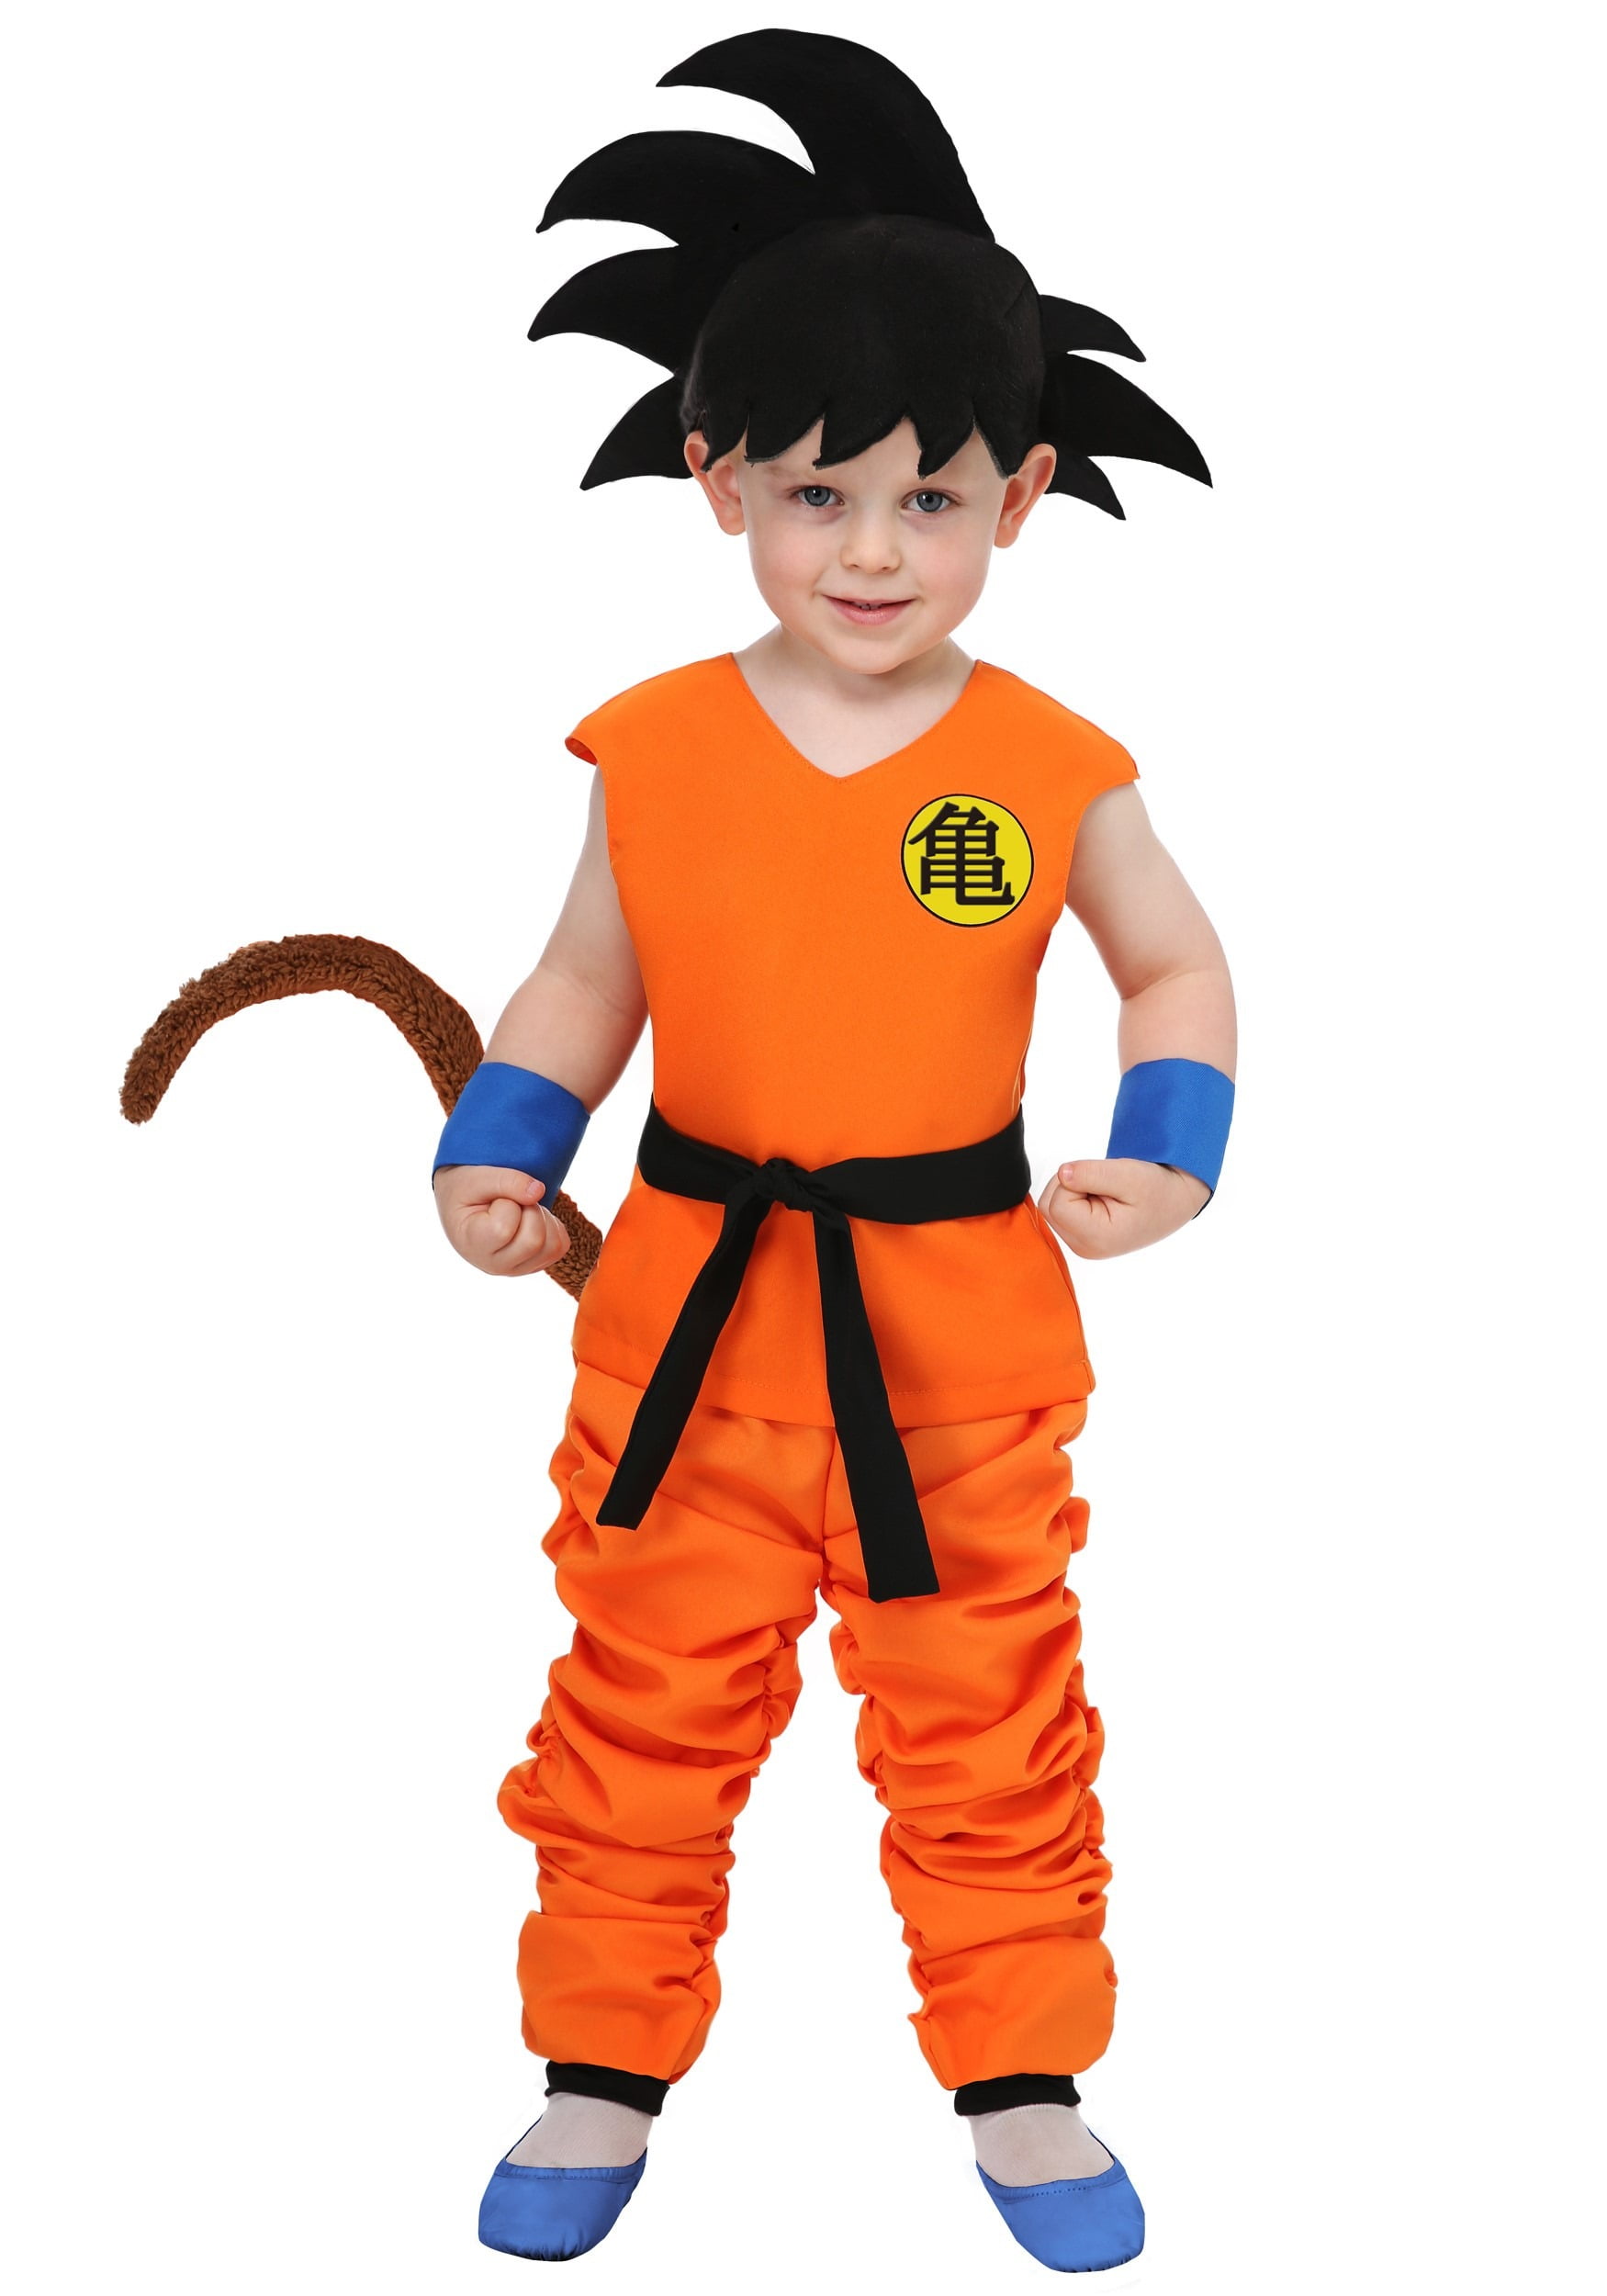 Gojoy shop-Dragon Ball warrior Z Goku costume and wig for boy carnival, 4  different sizes